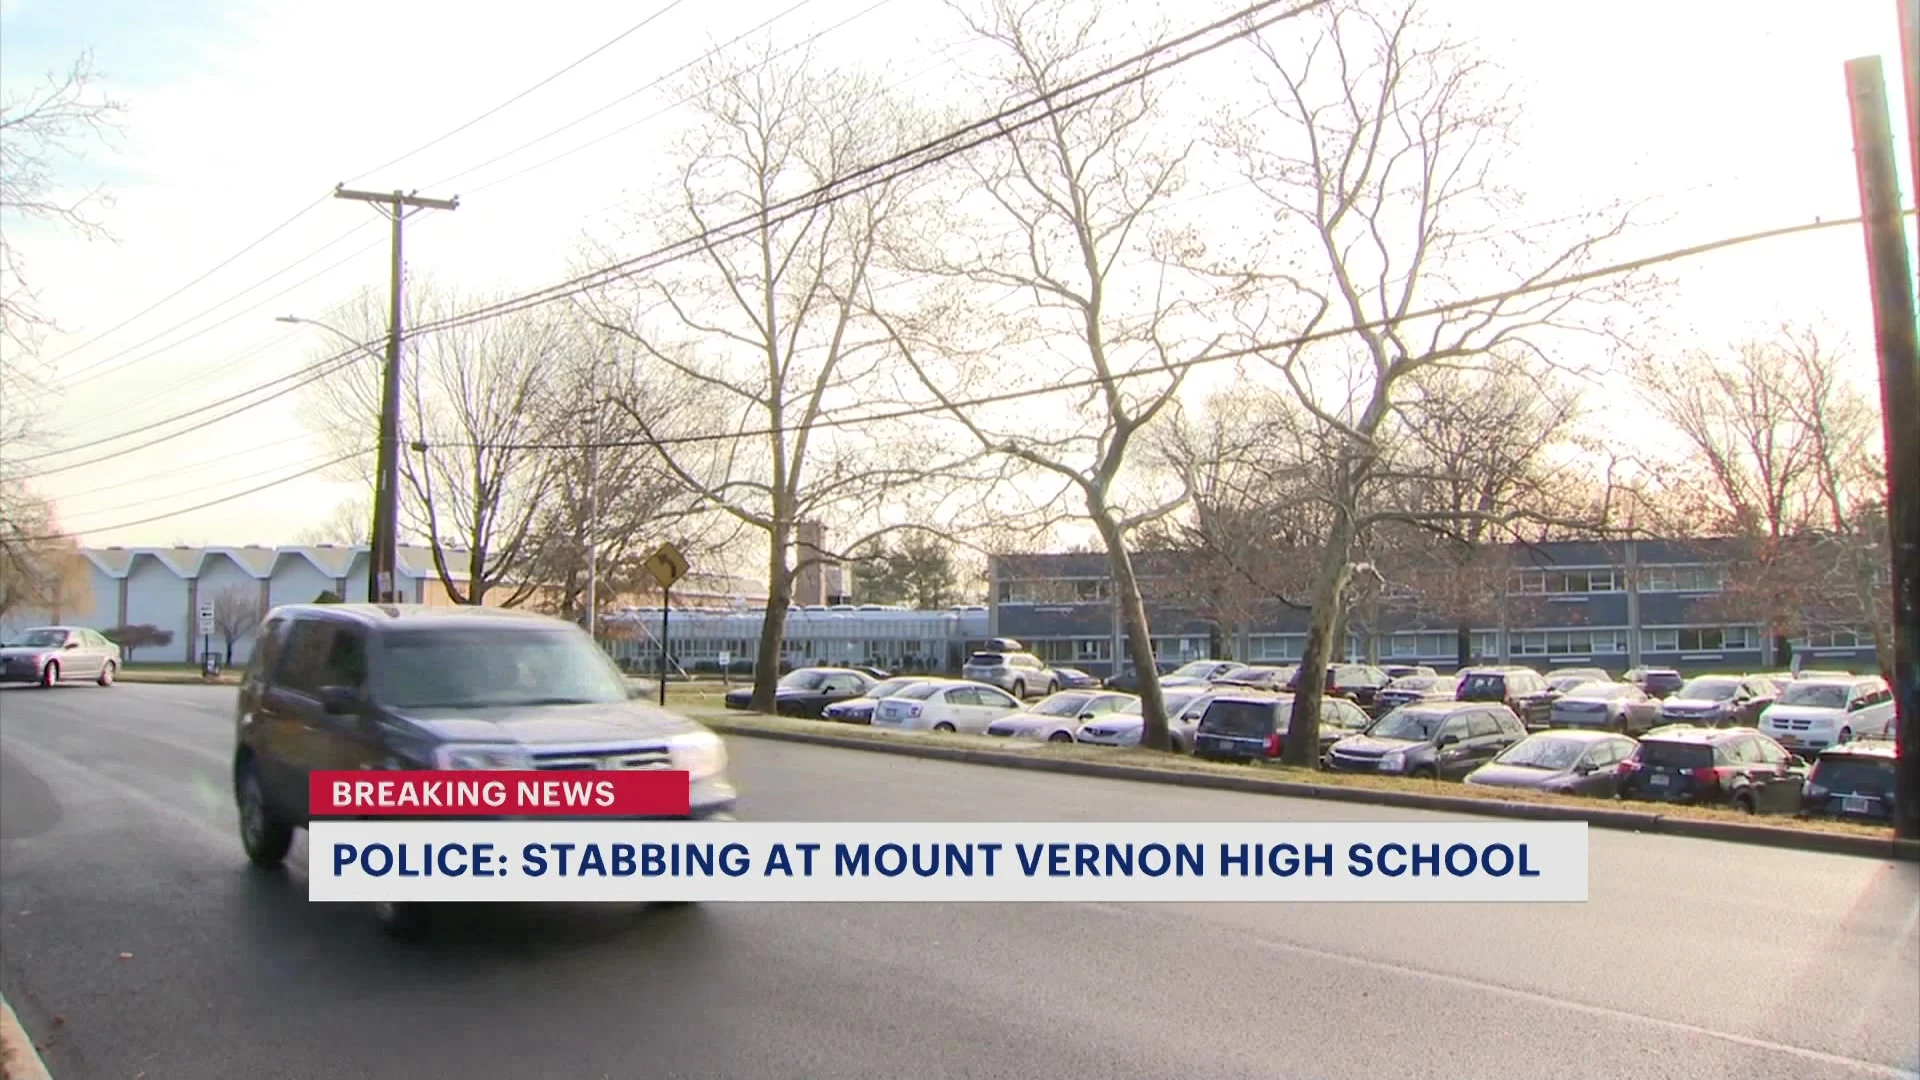 Police: Young victim stabbed in Mount Vernon High School; suspect arrested